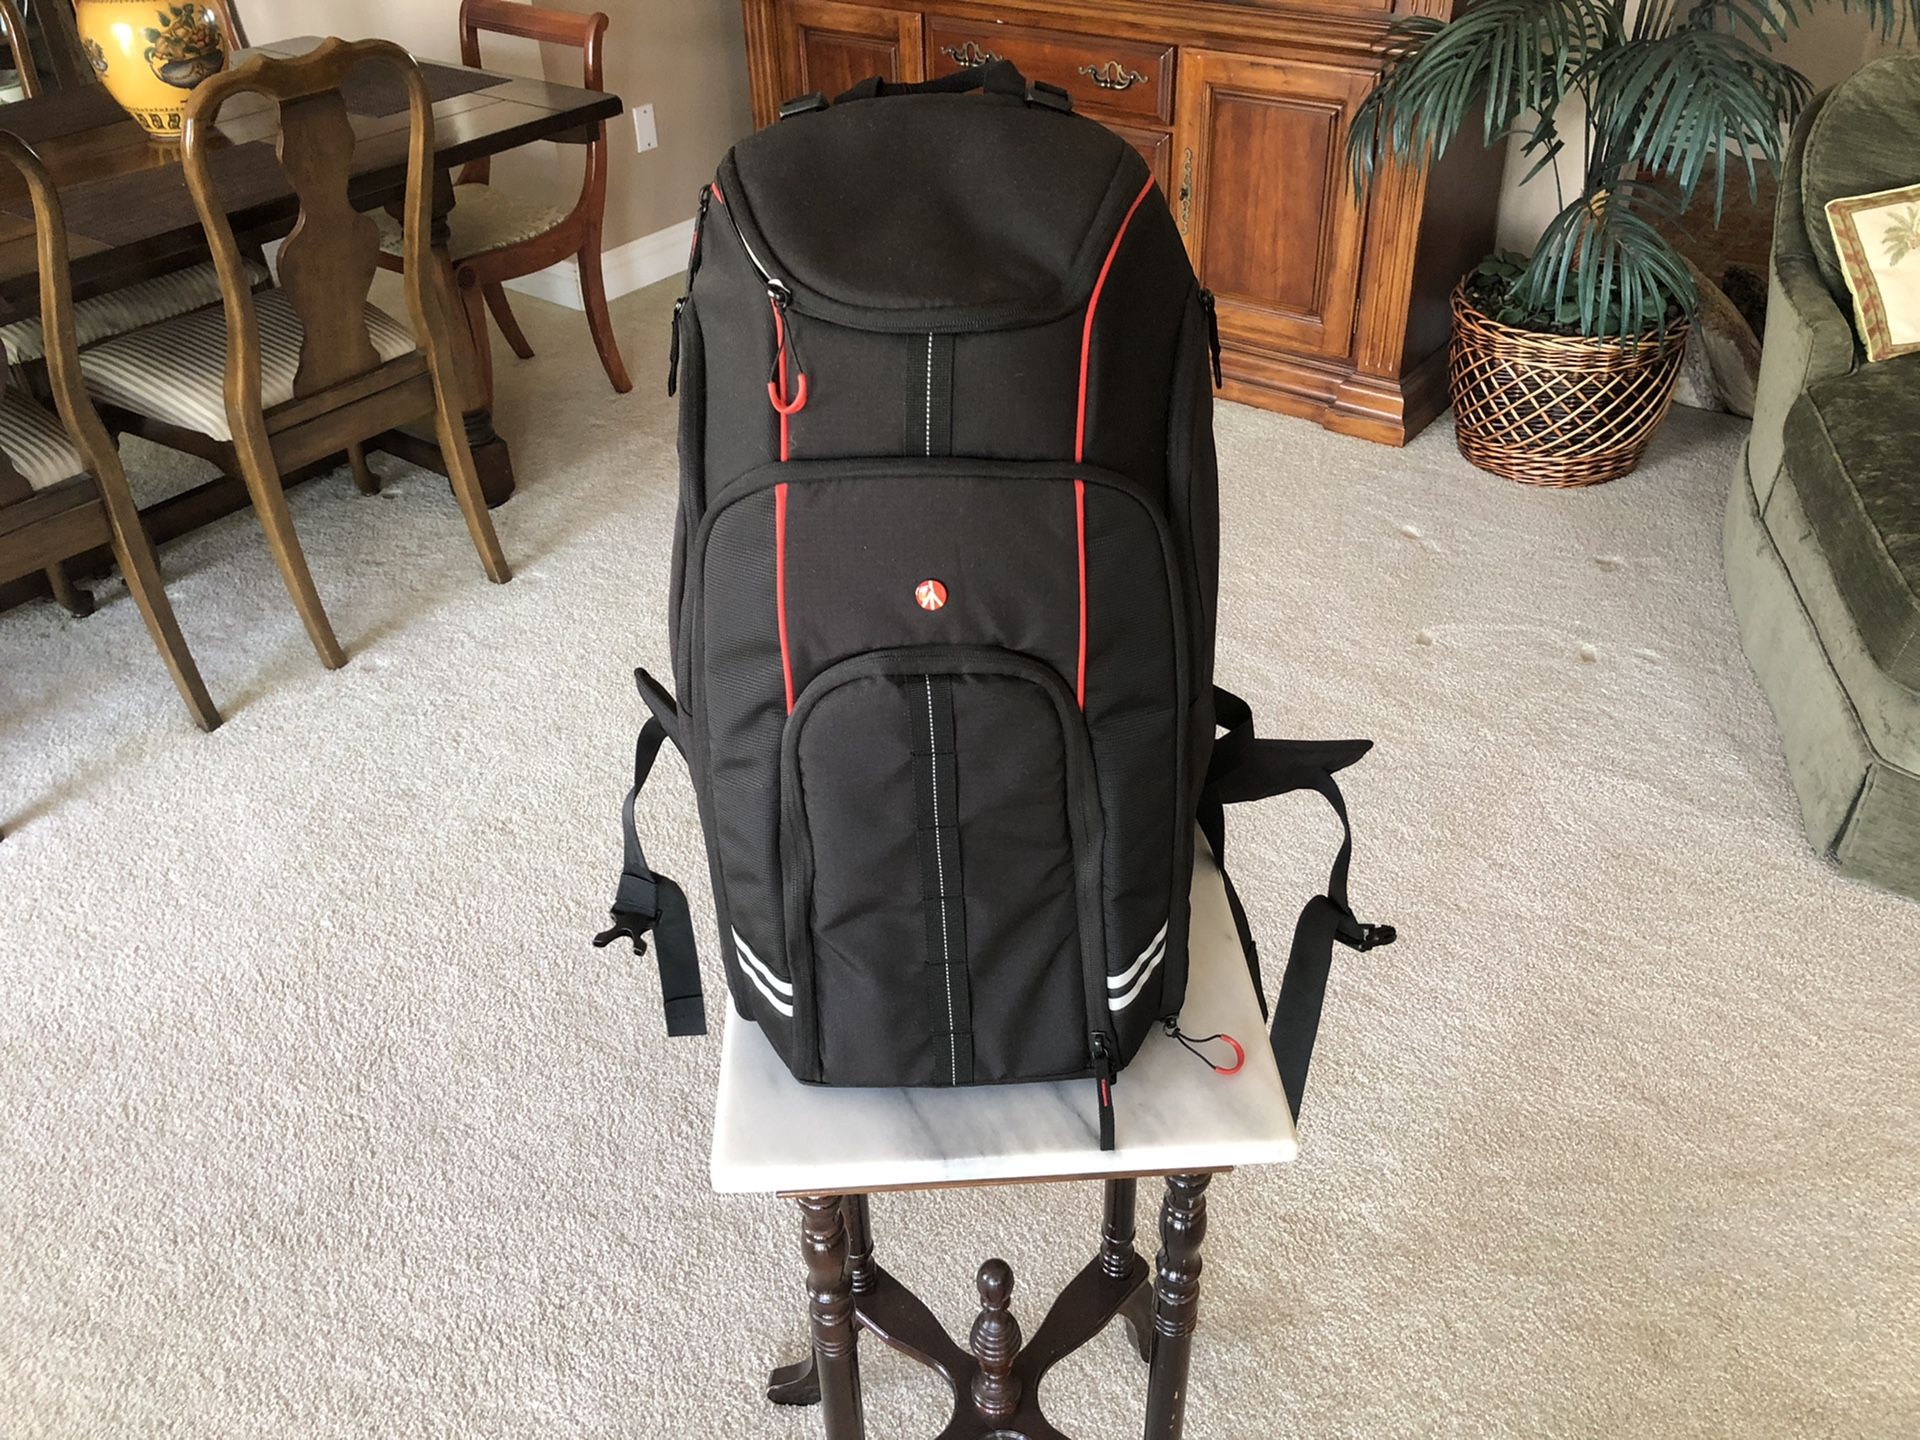 Manfrotto Drone Backpack D1